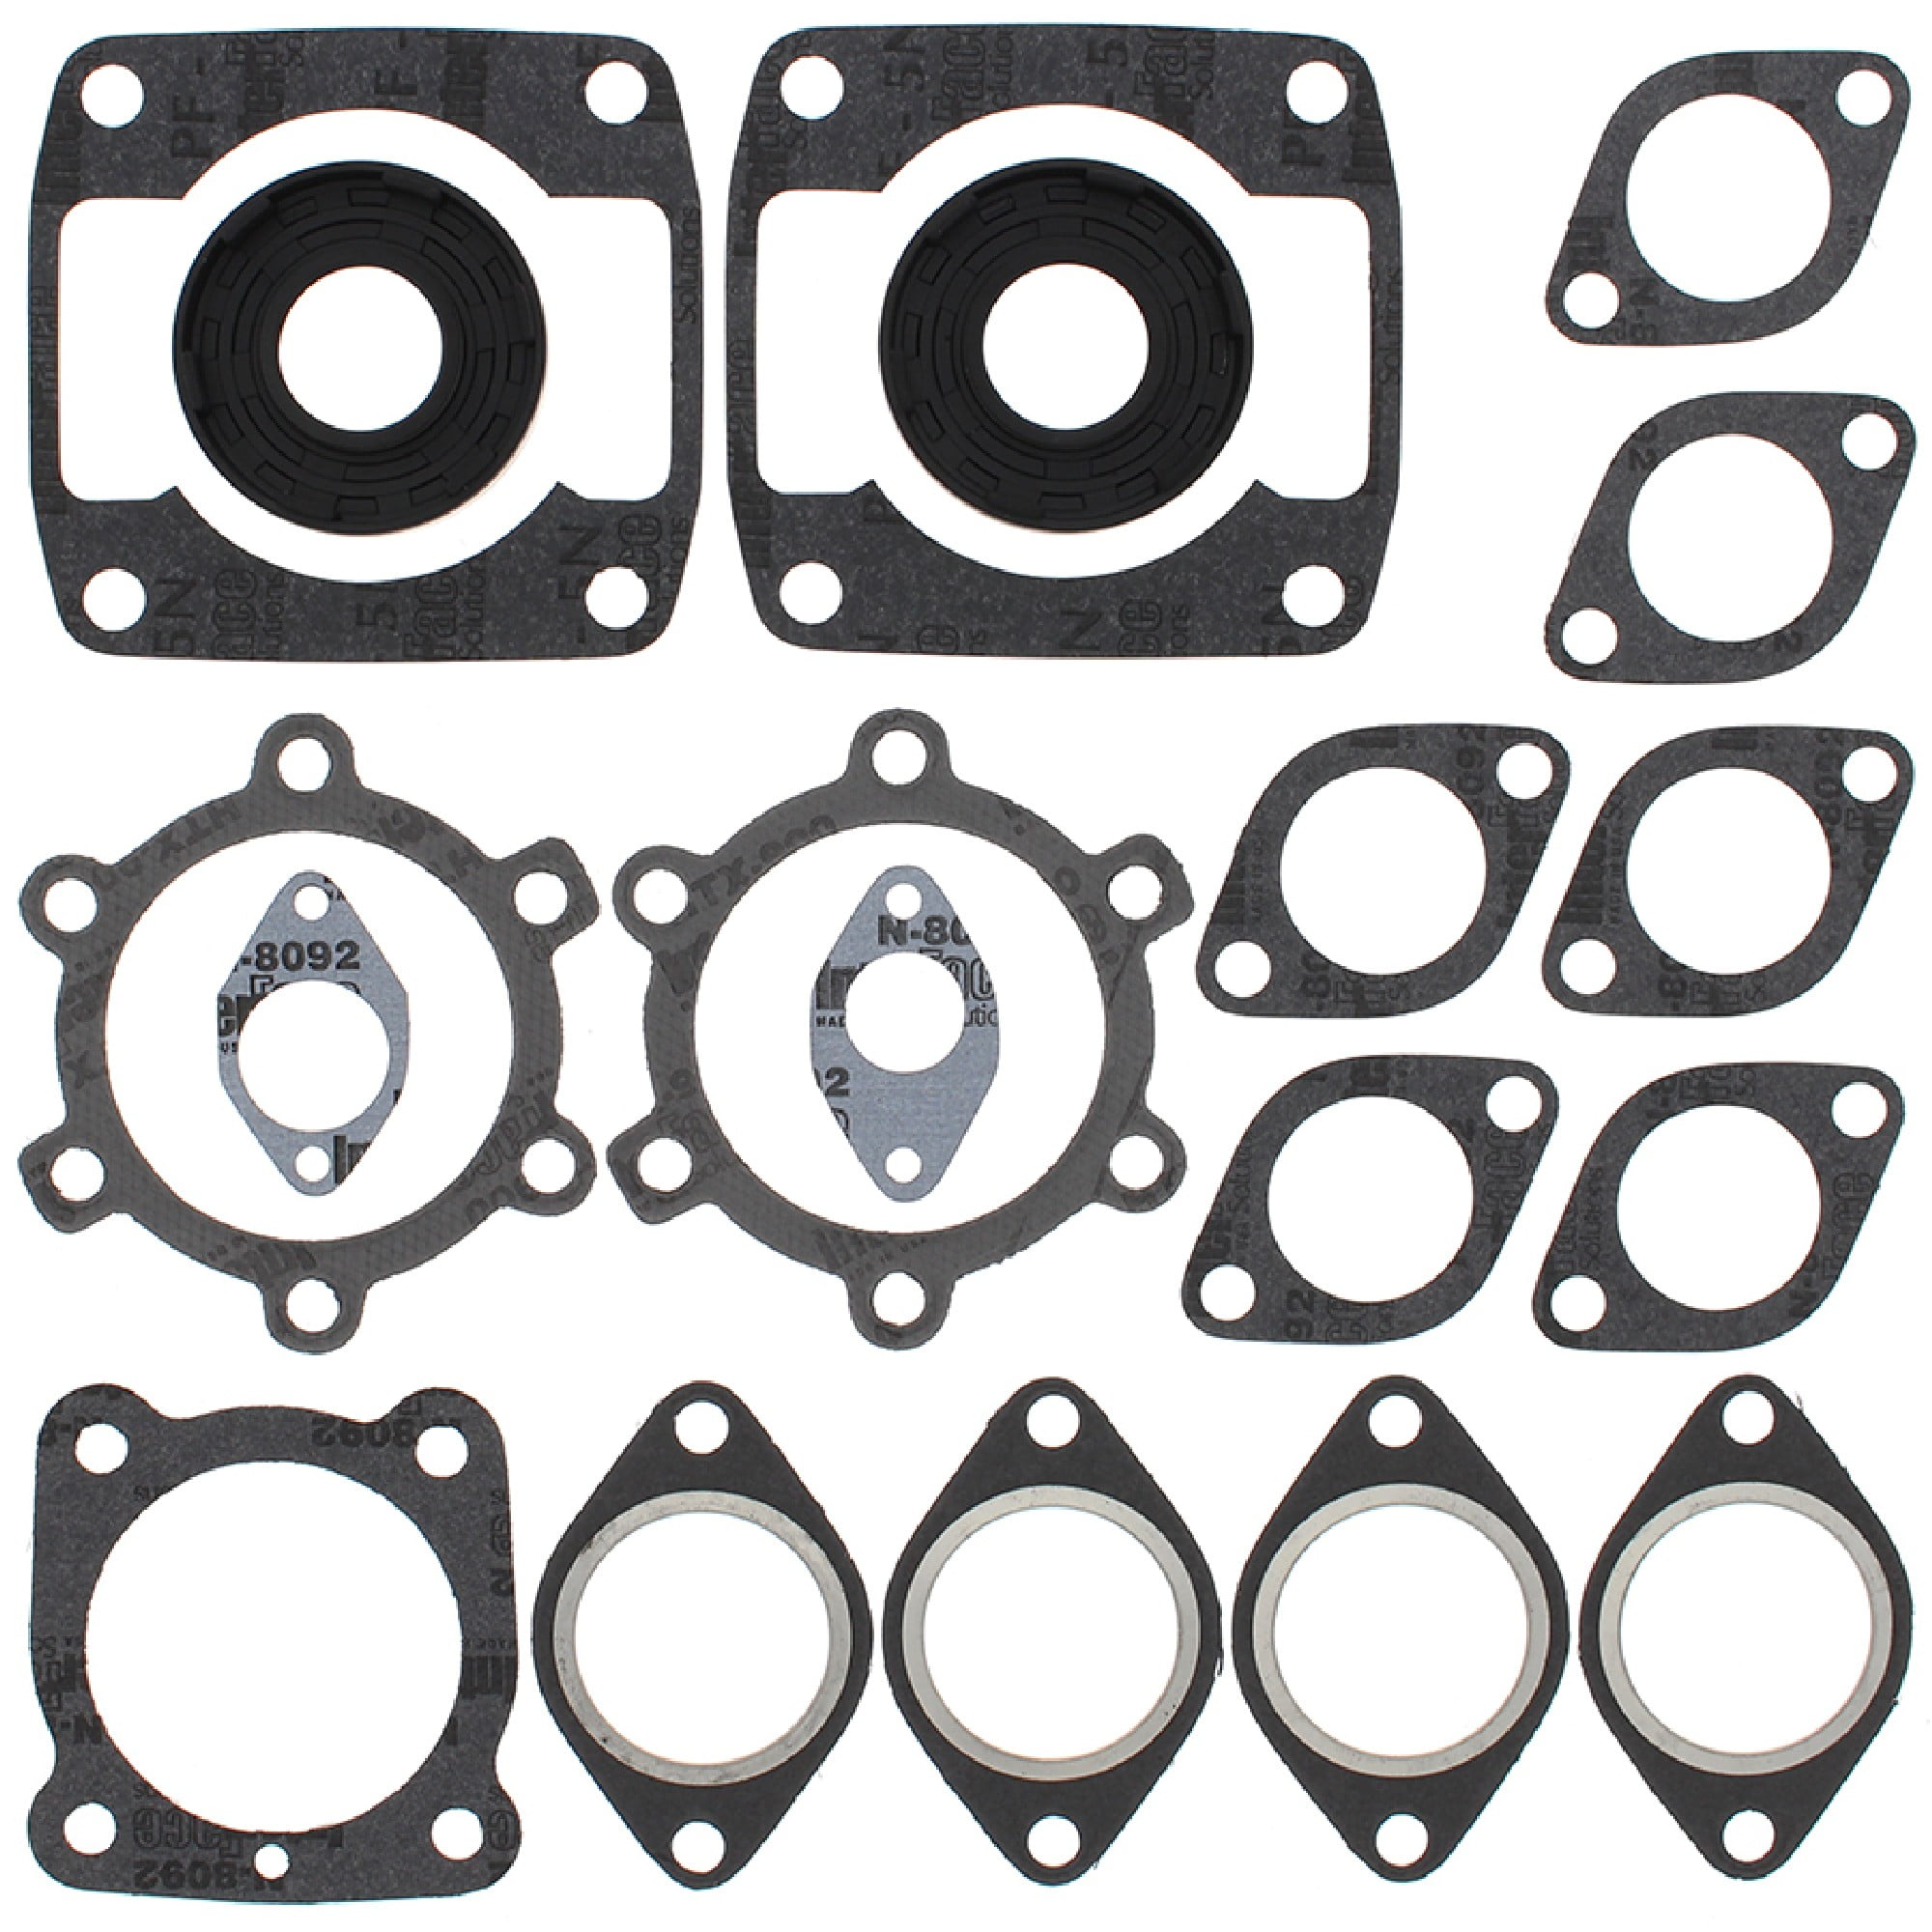 1976-1978 Arctic Cat Pantera 5000 Snowmobile SPI Full Gasket Kit with Oil Seal 